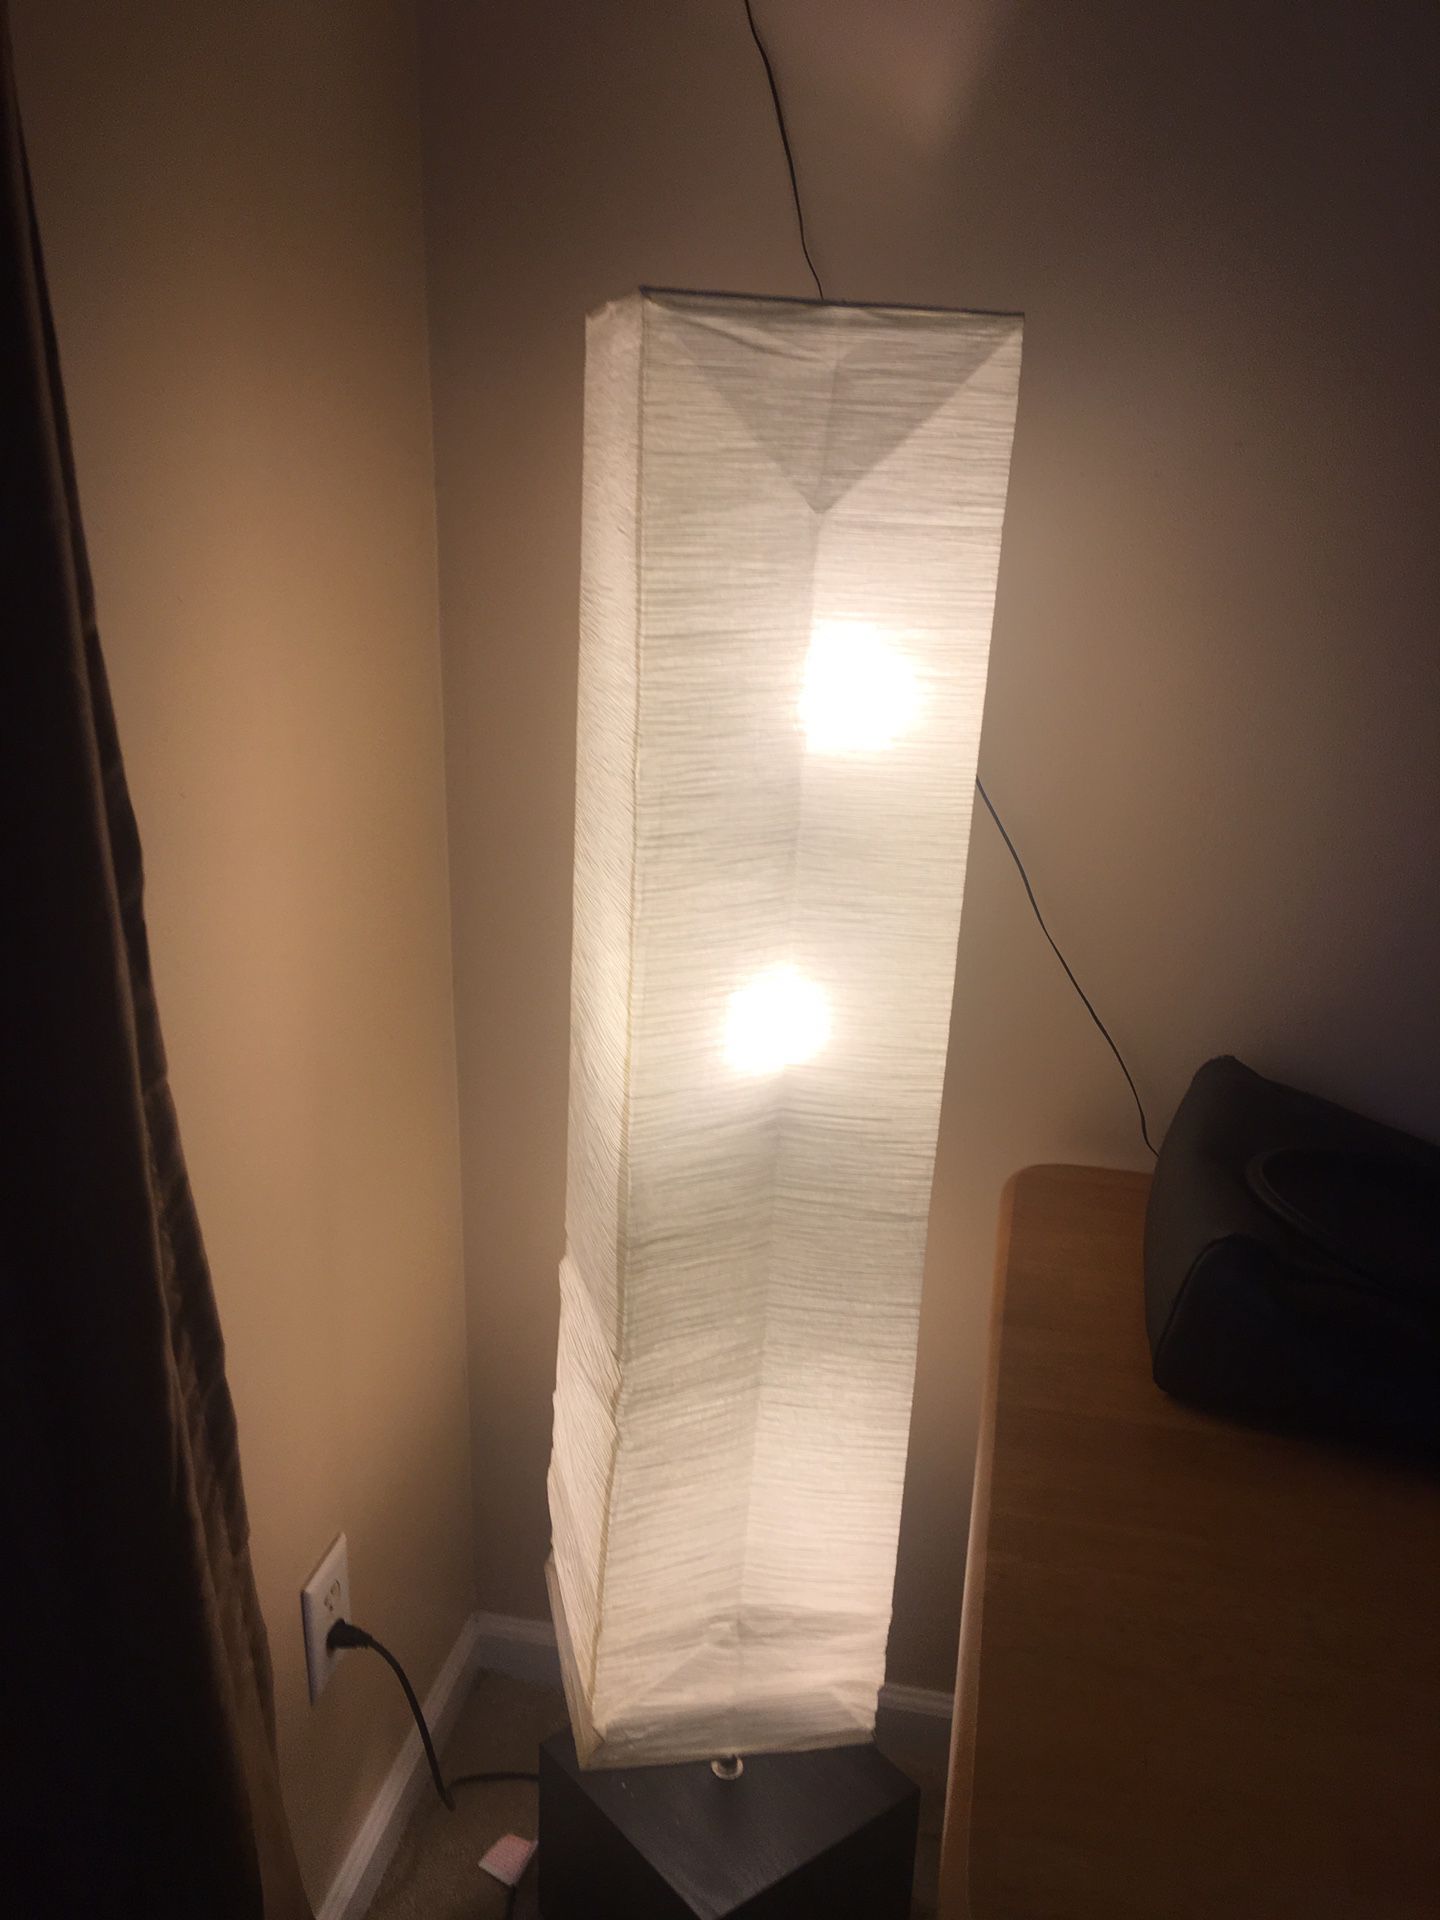 Floor lamp - will take $15 if purchased today